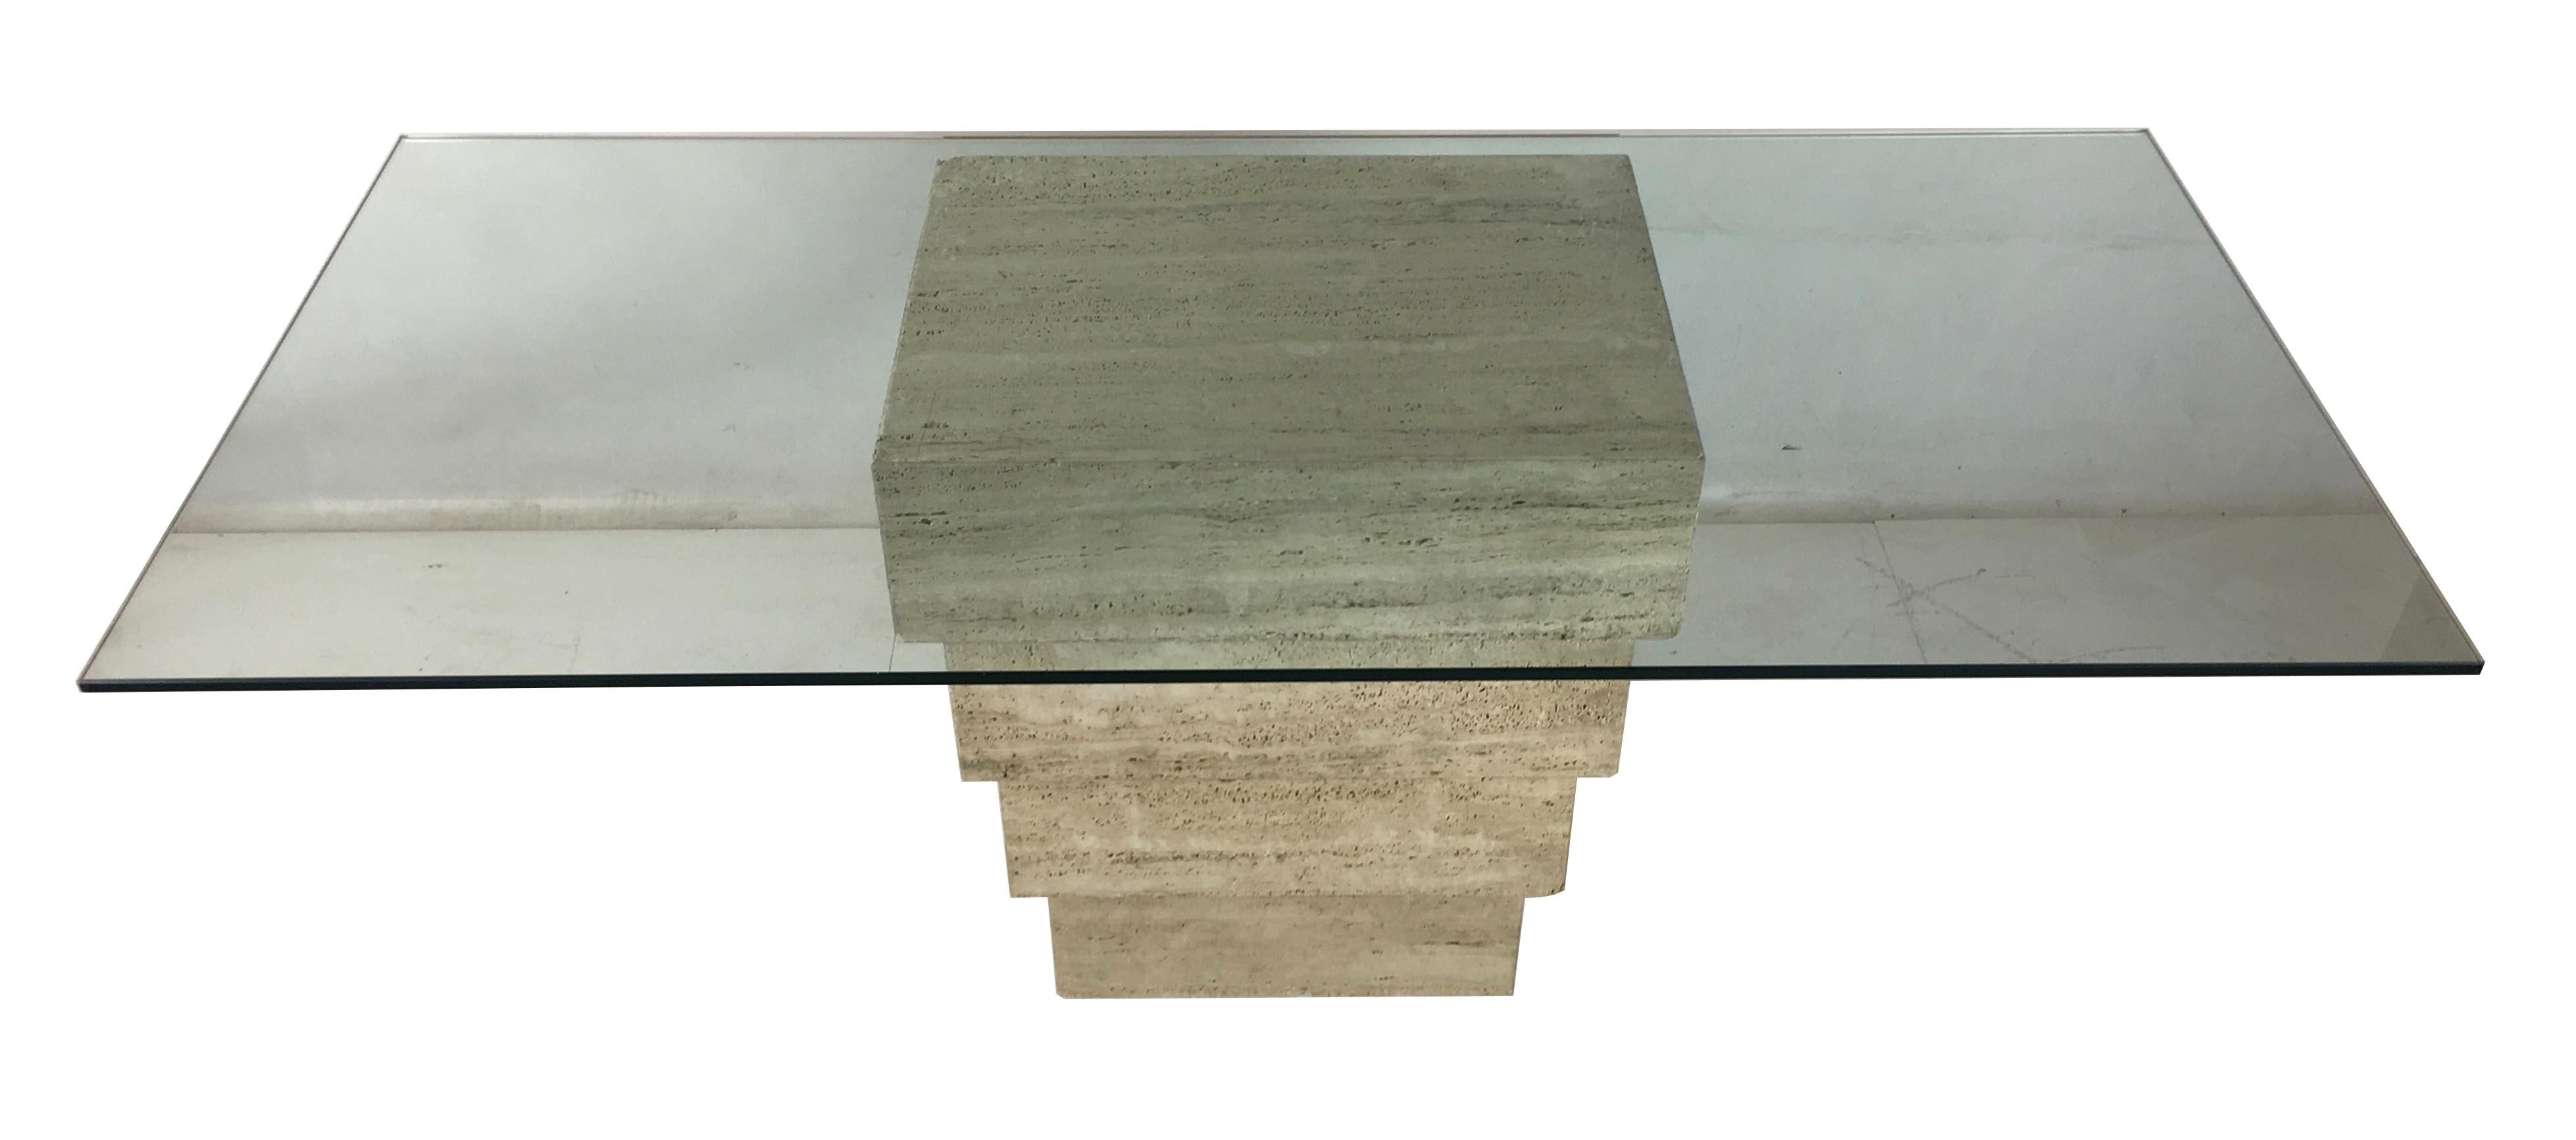 Large-scale 1970s Italian travertine writing table consisting of an inverted stack of travertine 